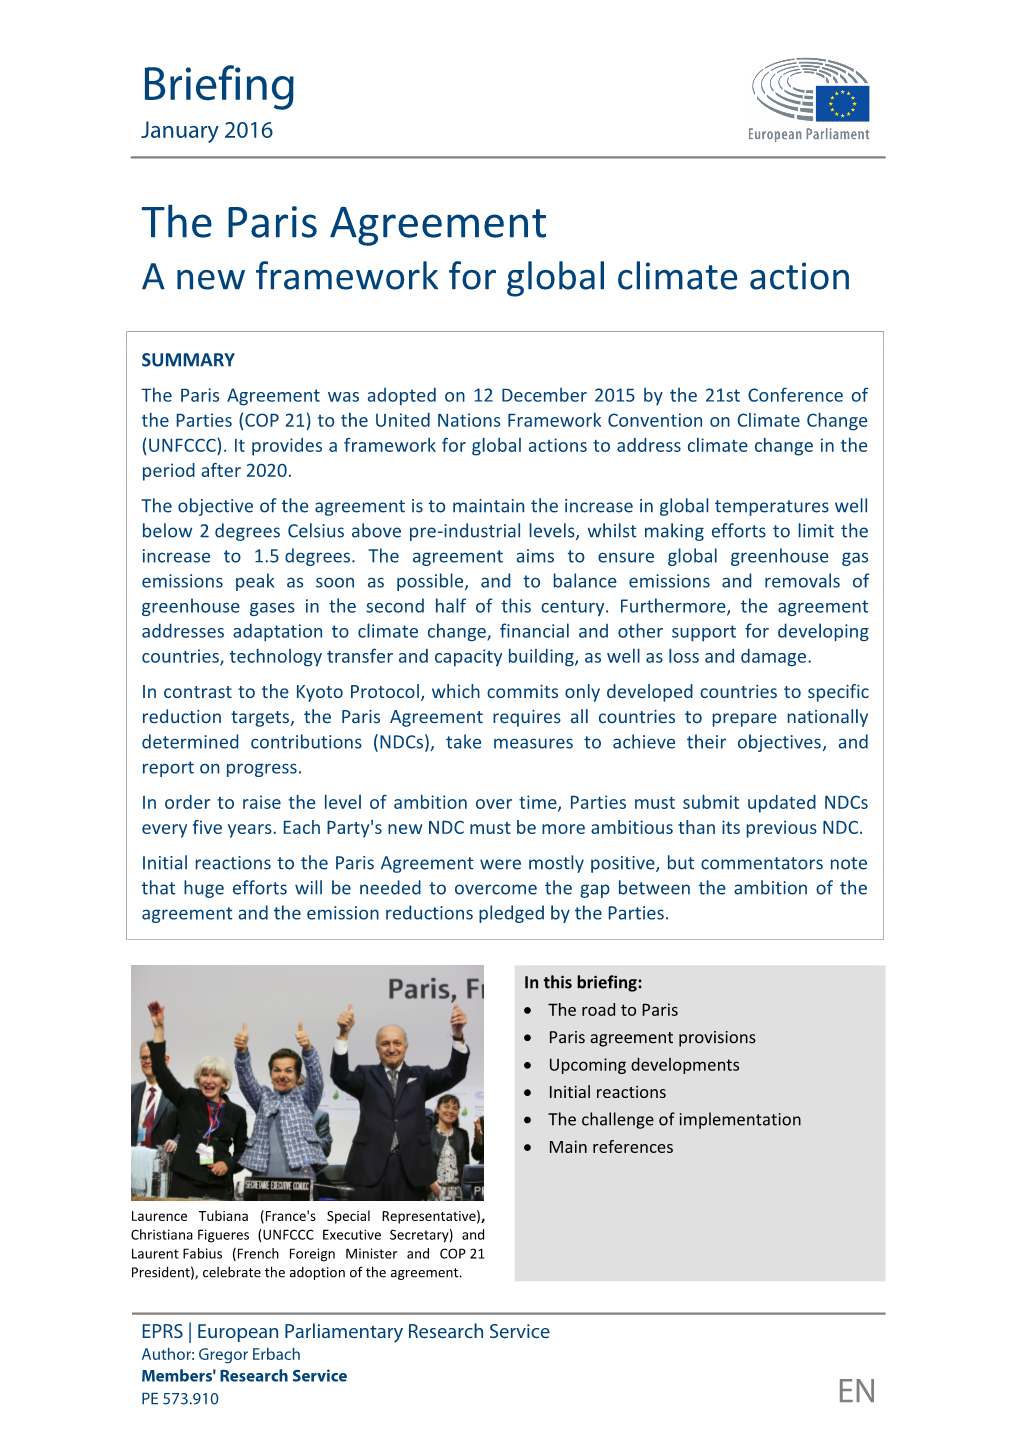 The Paris Agreement a New Framework for Global Climate Action